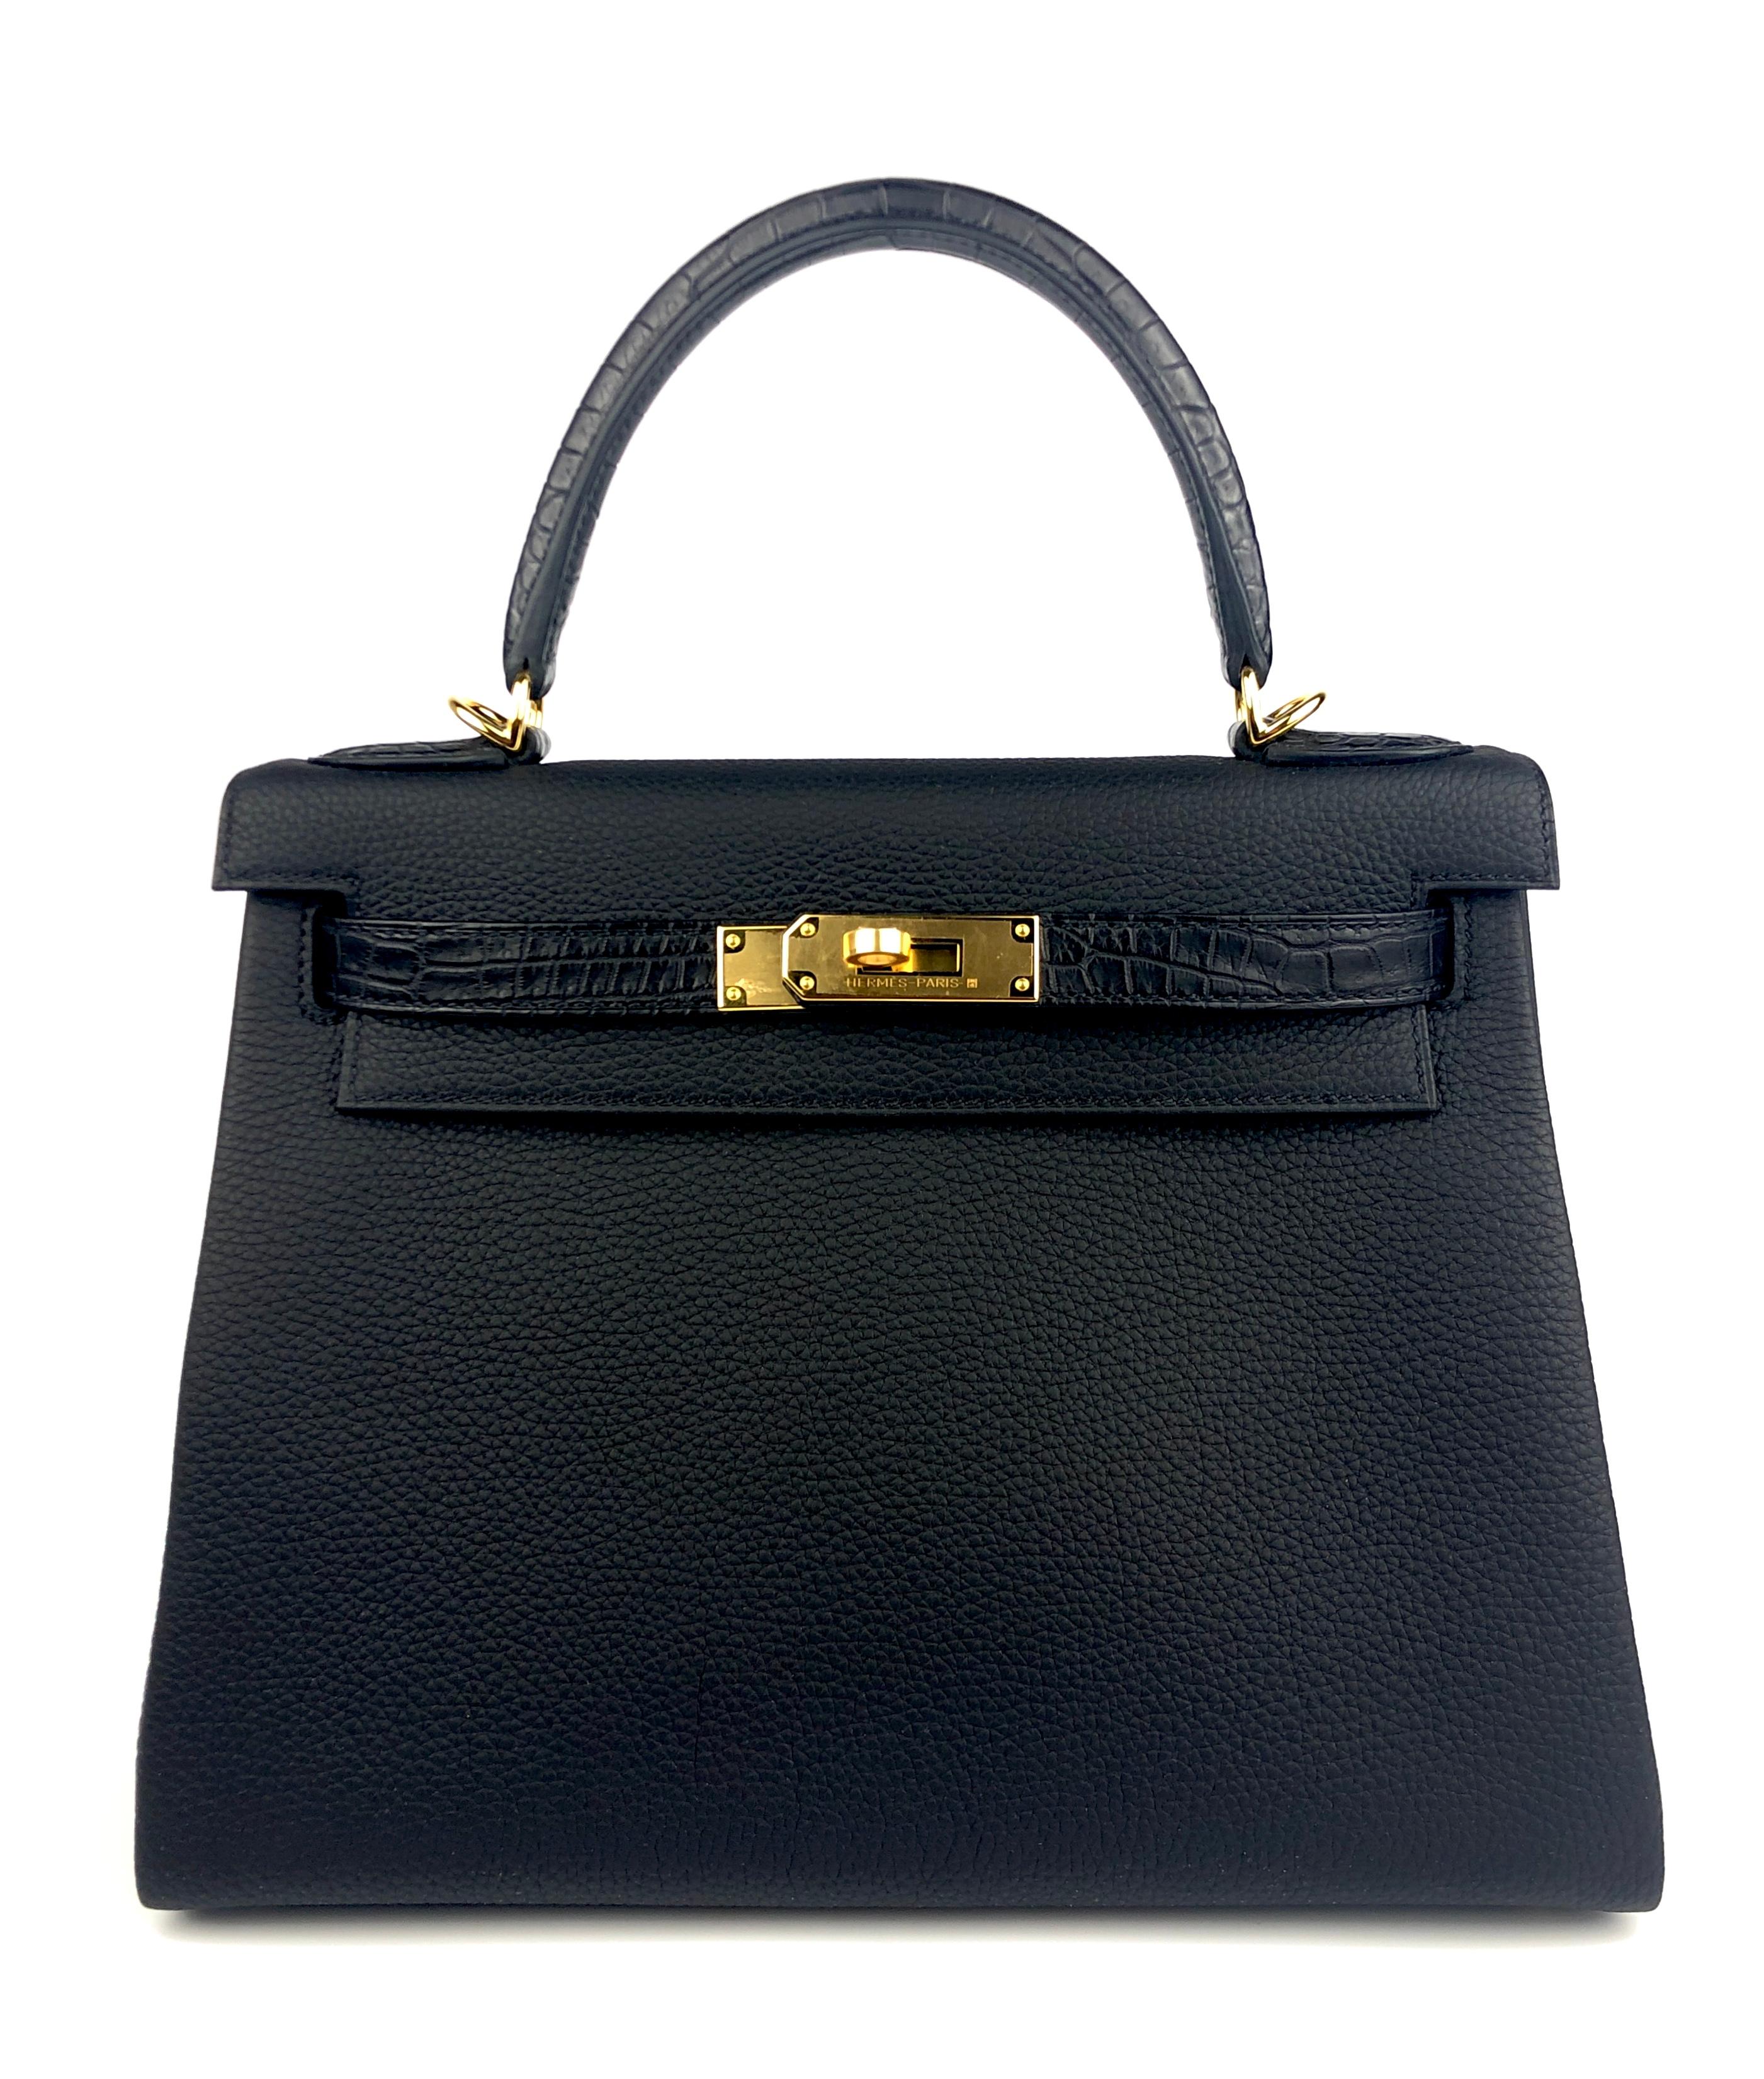 Brand New 2021 Ultra Rare Hermes Kelly 28 Touch Black Leather and Matte Alligator Gold Hardware. Includes all accessories and Box.

Shop with Confidence from Lux Addicts. Authenticity Guaranteed! 